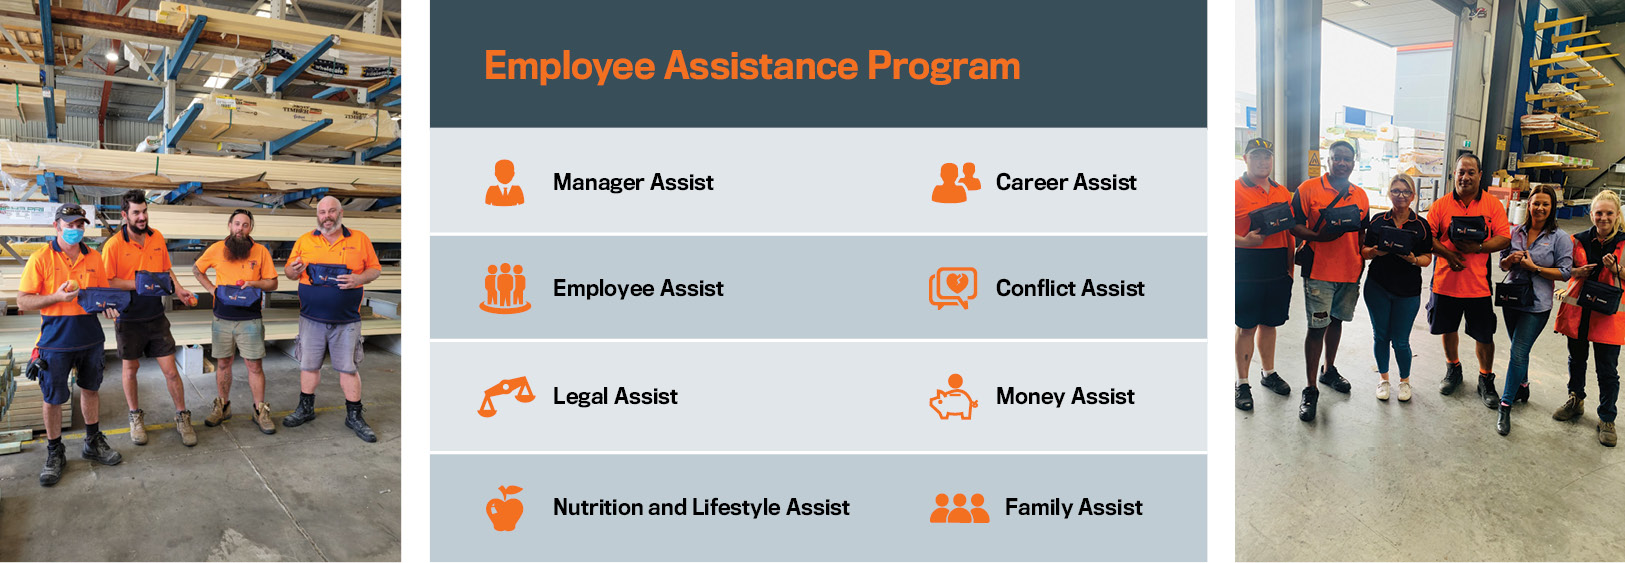 Employee Assistance Program. Manager Assist, Employee Assist, Legal Assist, Nutrition and Lifestyle Assist, Career Assist, Conflict Assist, Money Assist, Family Assist. 